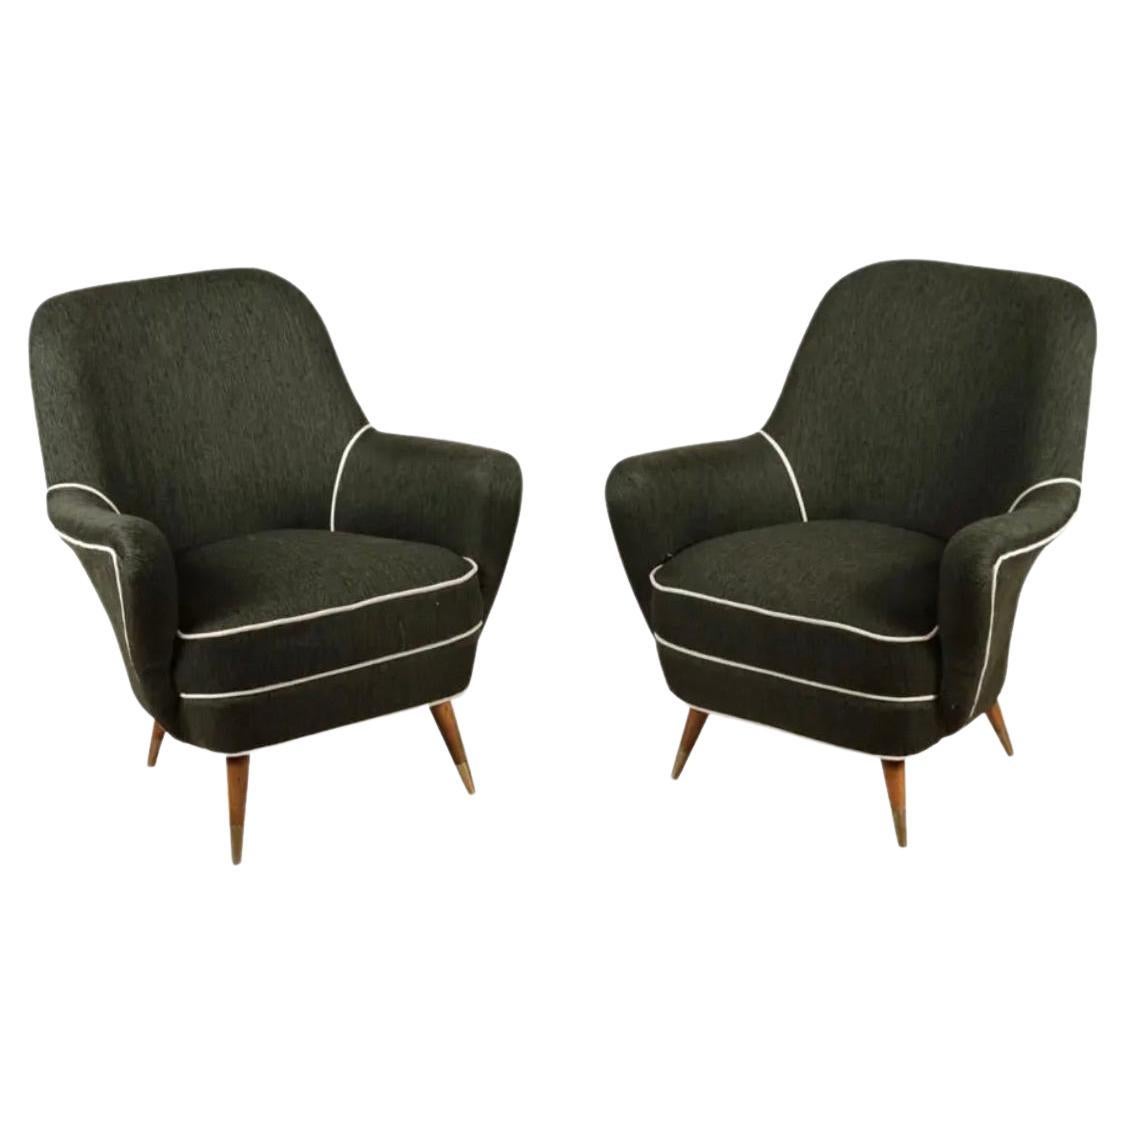 Pair of Mid-Century Modern Lounge Chairs For Sale